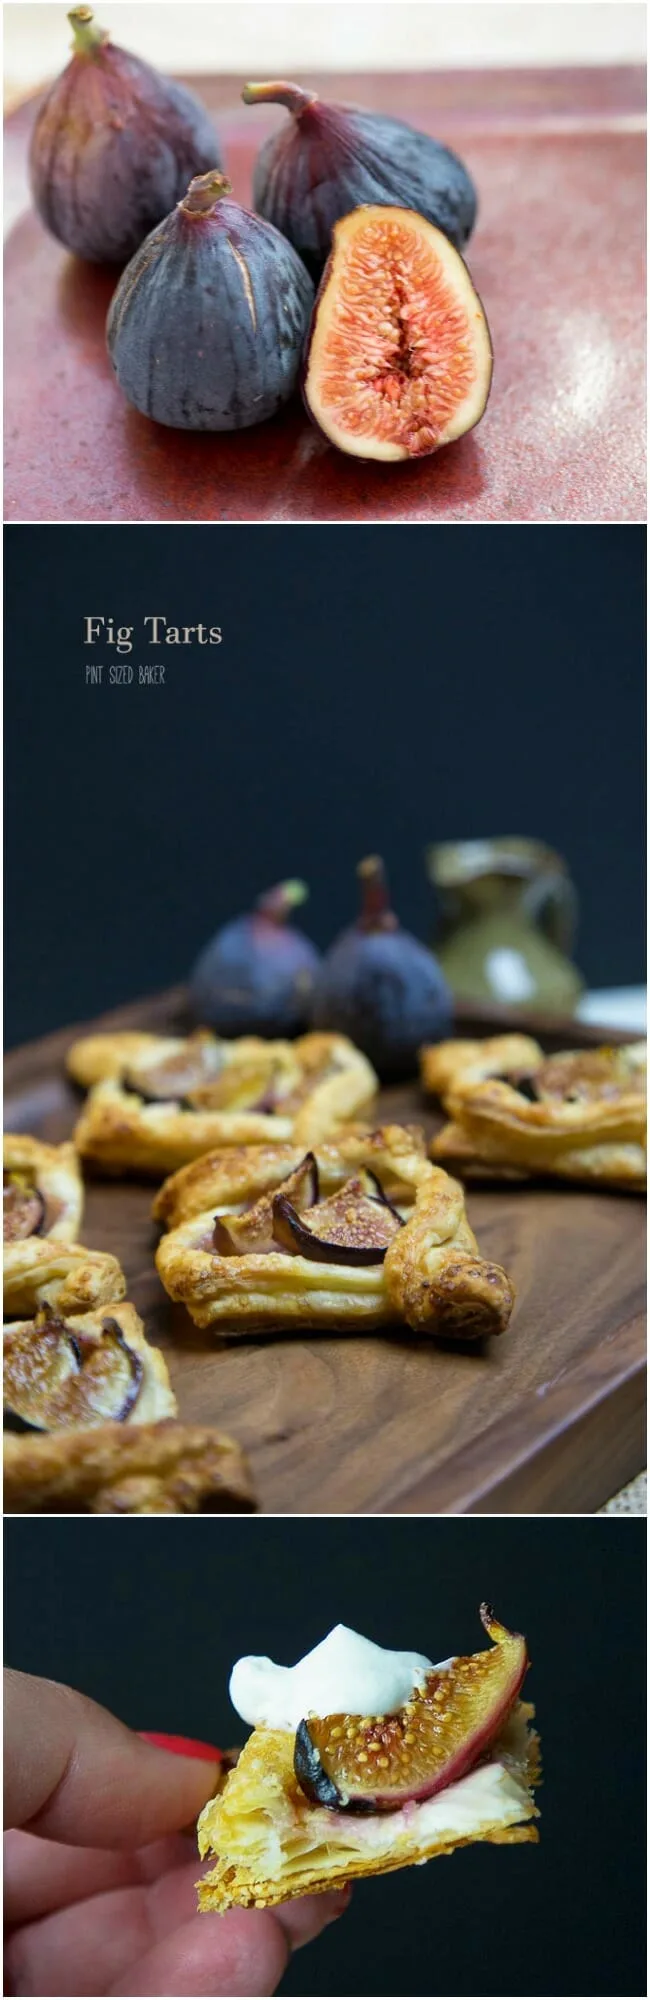 Easy puff pastry Fig Tarts made with just three ingredients and ready to enjoy in under 30 minutes.